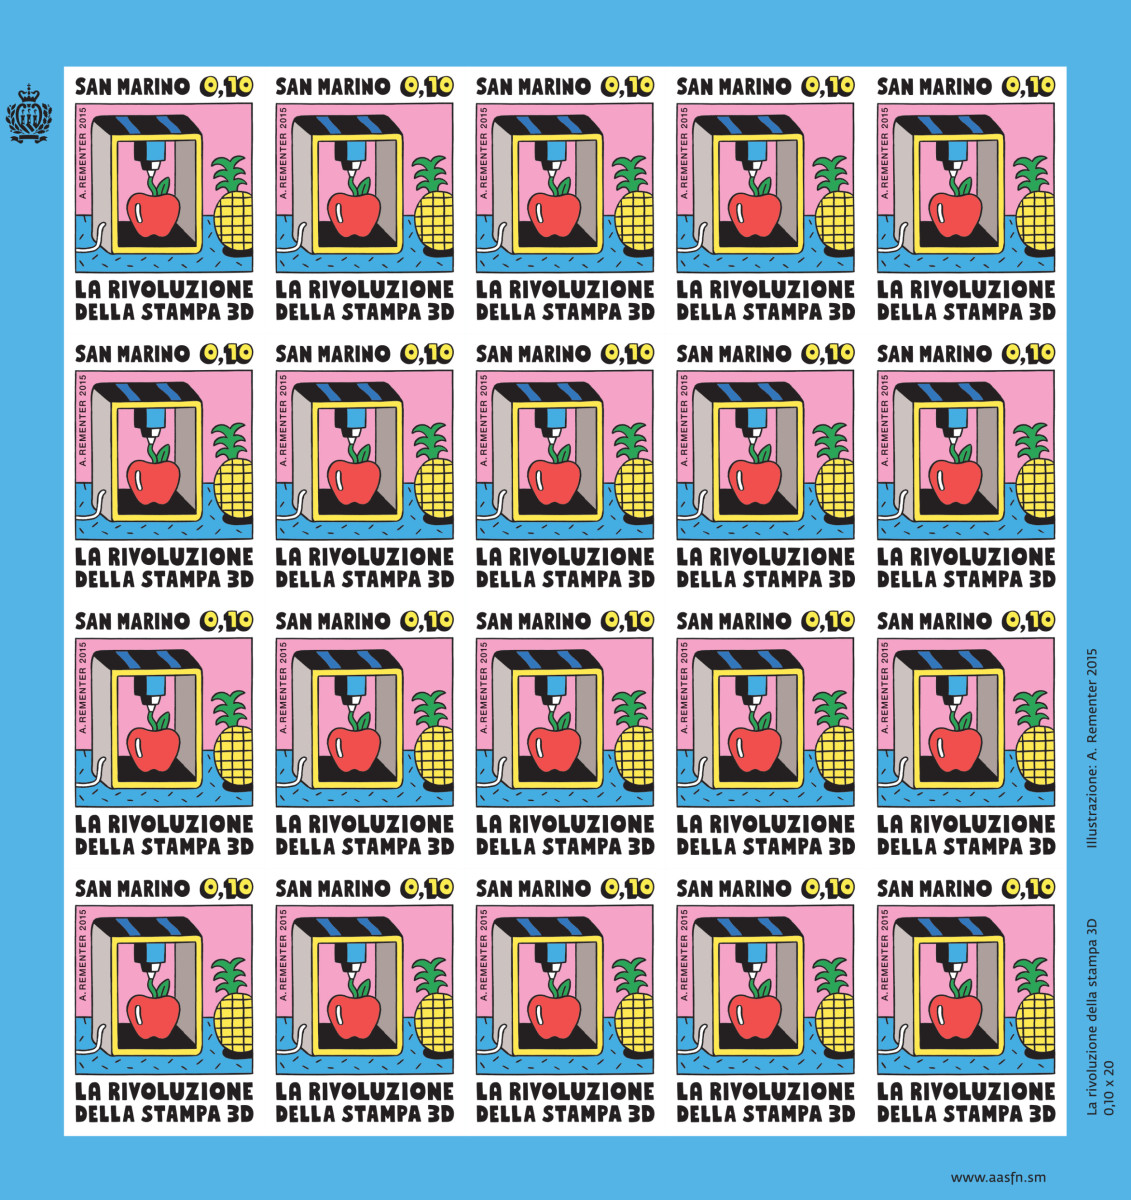 Andy Rementer / Commercial Work / San Marino Stamps&lt;span class=&quot;slide_numbers&quot;&gt;&lt;span class=&quot;slide_number&quot;&gt;5&lt;/span&gt;/7&lt;/span&gt;